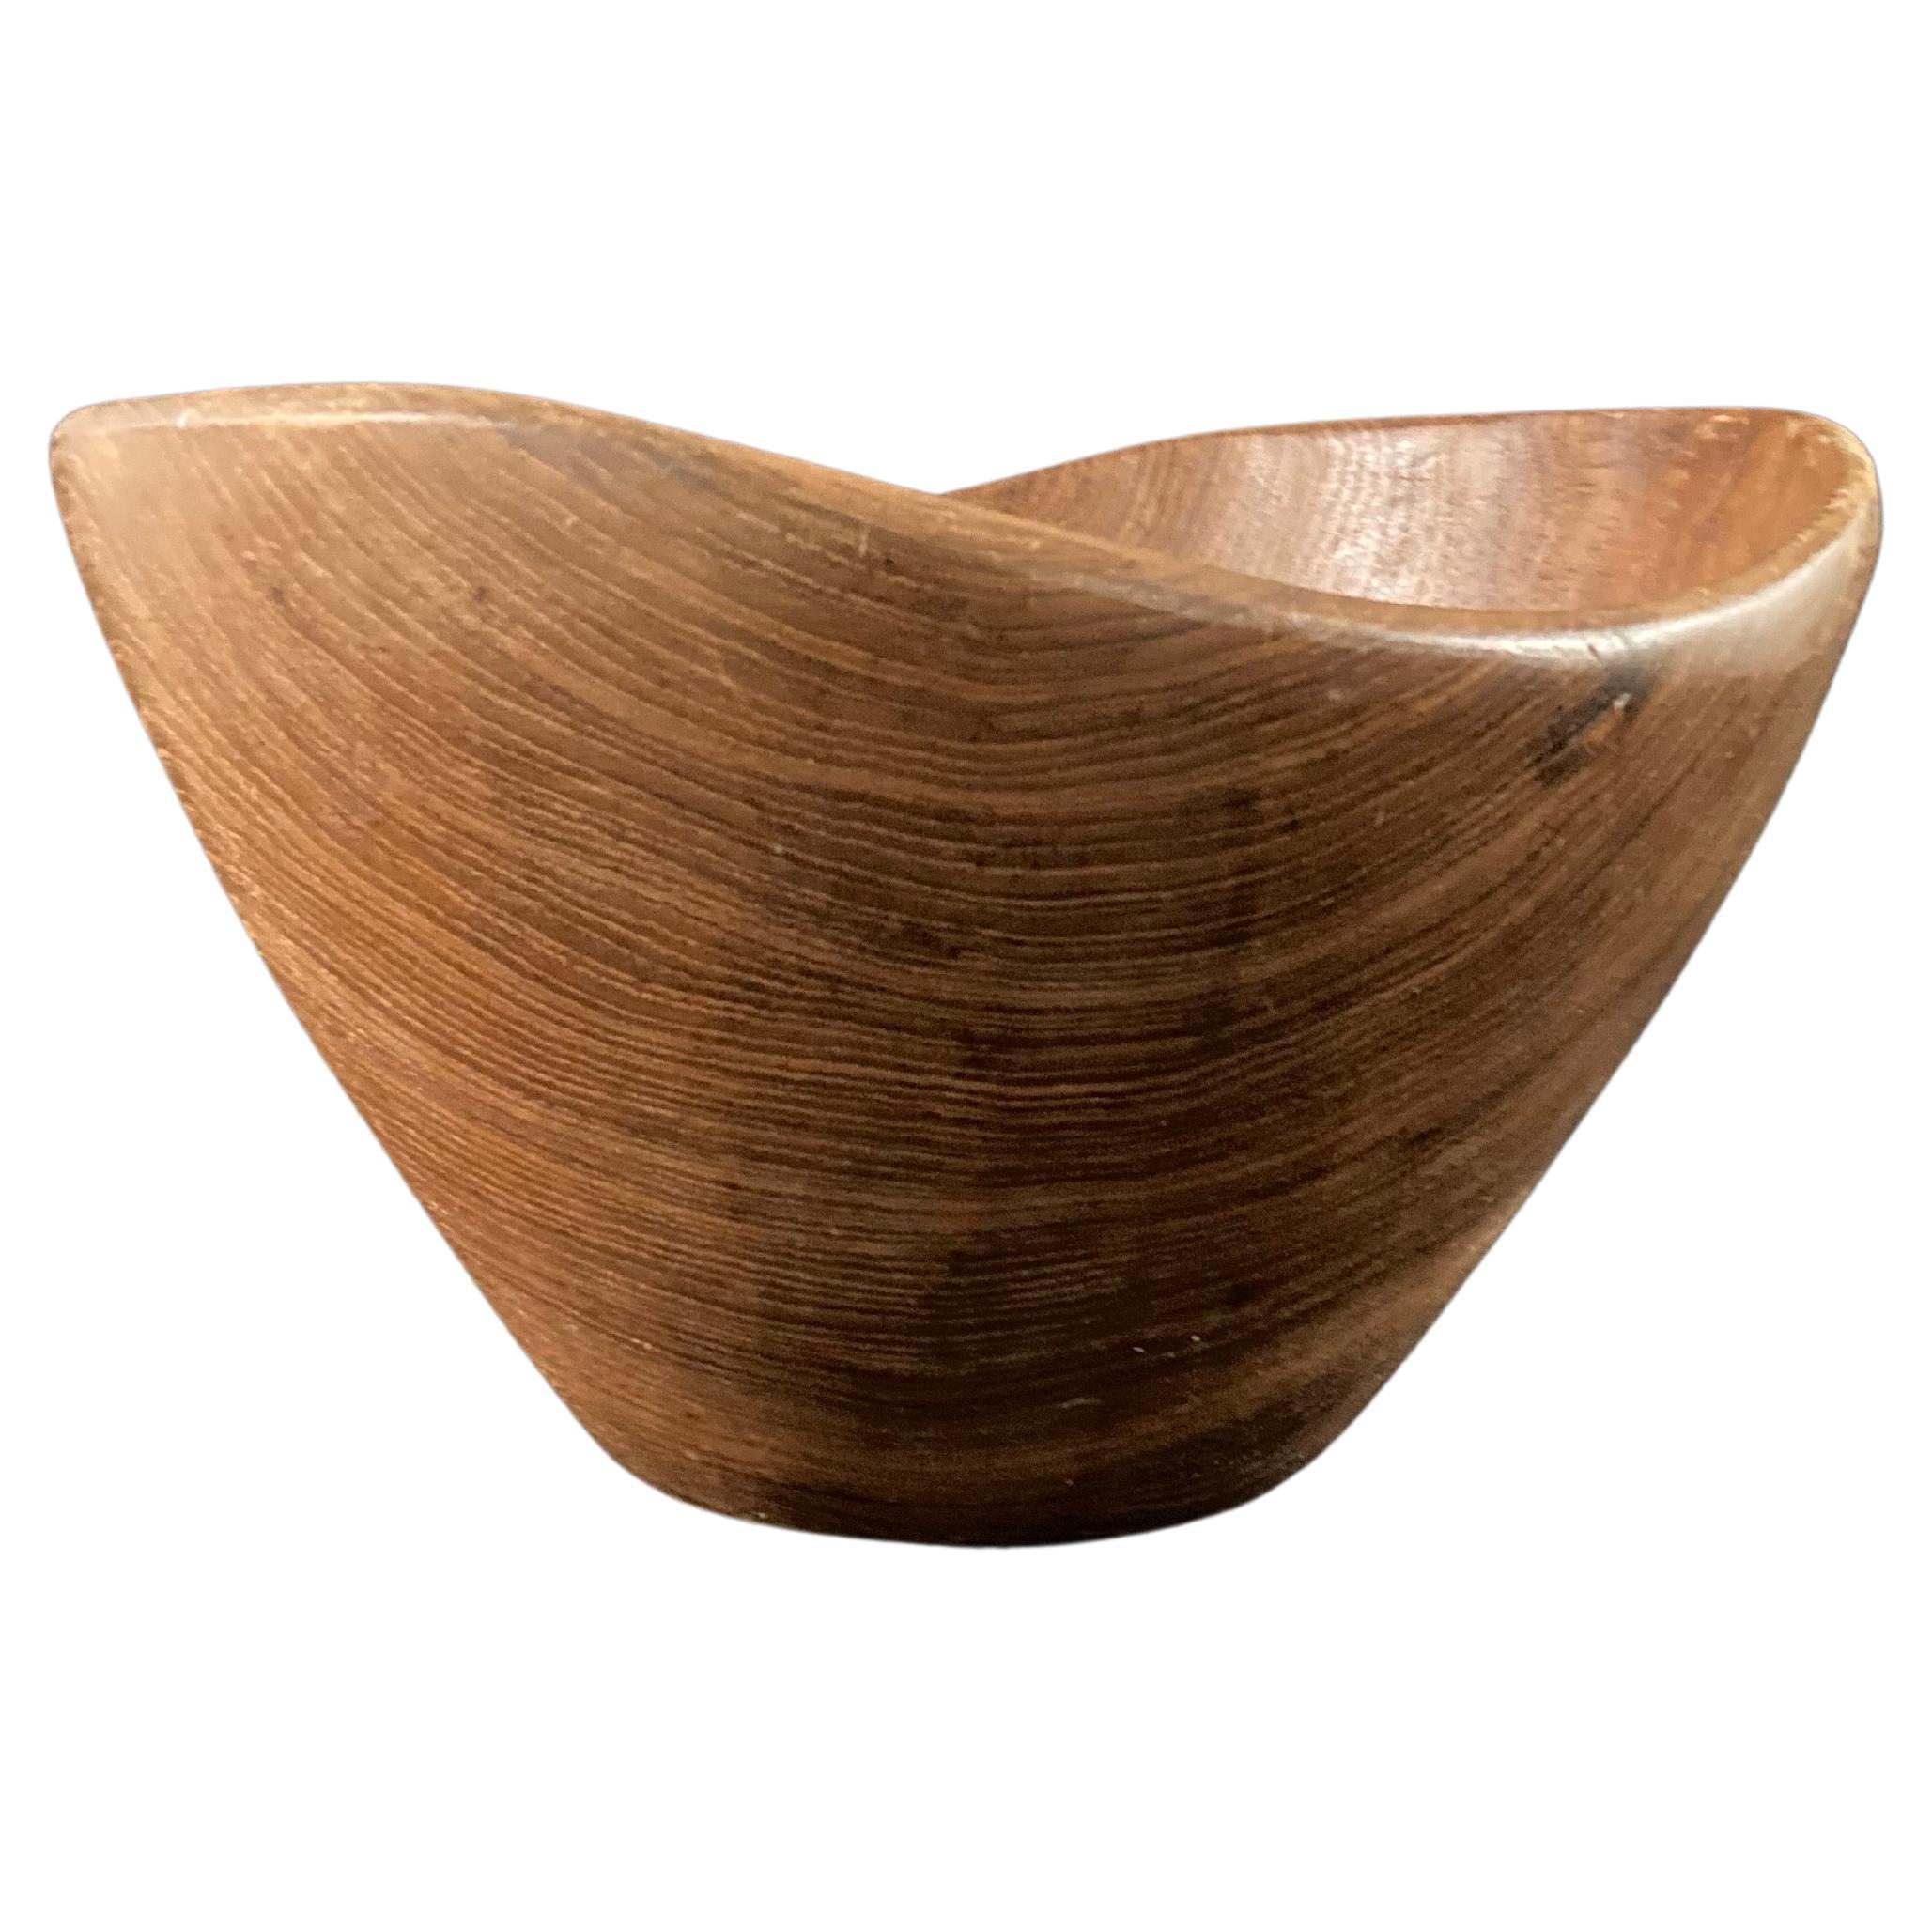 A 1960s Scandinavian teak bowl in the style of Jens Quistgaard.
The undulating rim and grain of wood give it a wonderfully natural and warm look. 

Danish sculptor and industrial designer Jens Quistgaard (1919–2008) enjoyed a long and successful